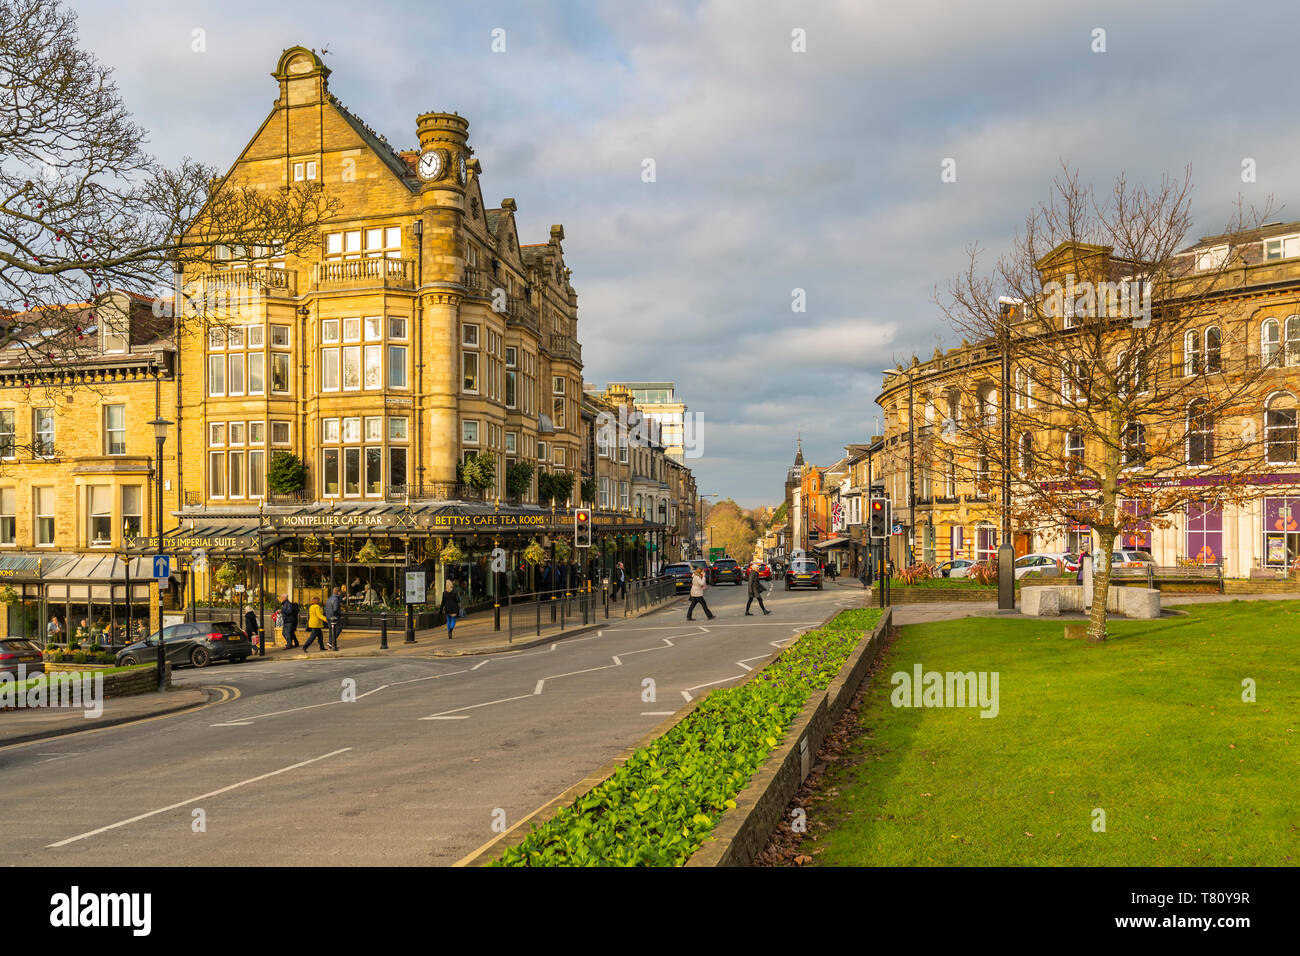 View of Parliament Street at Christmas, Harrogate, North Yorkshire, England, United Kingdom, Europe Stock Photo